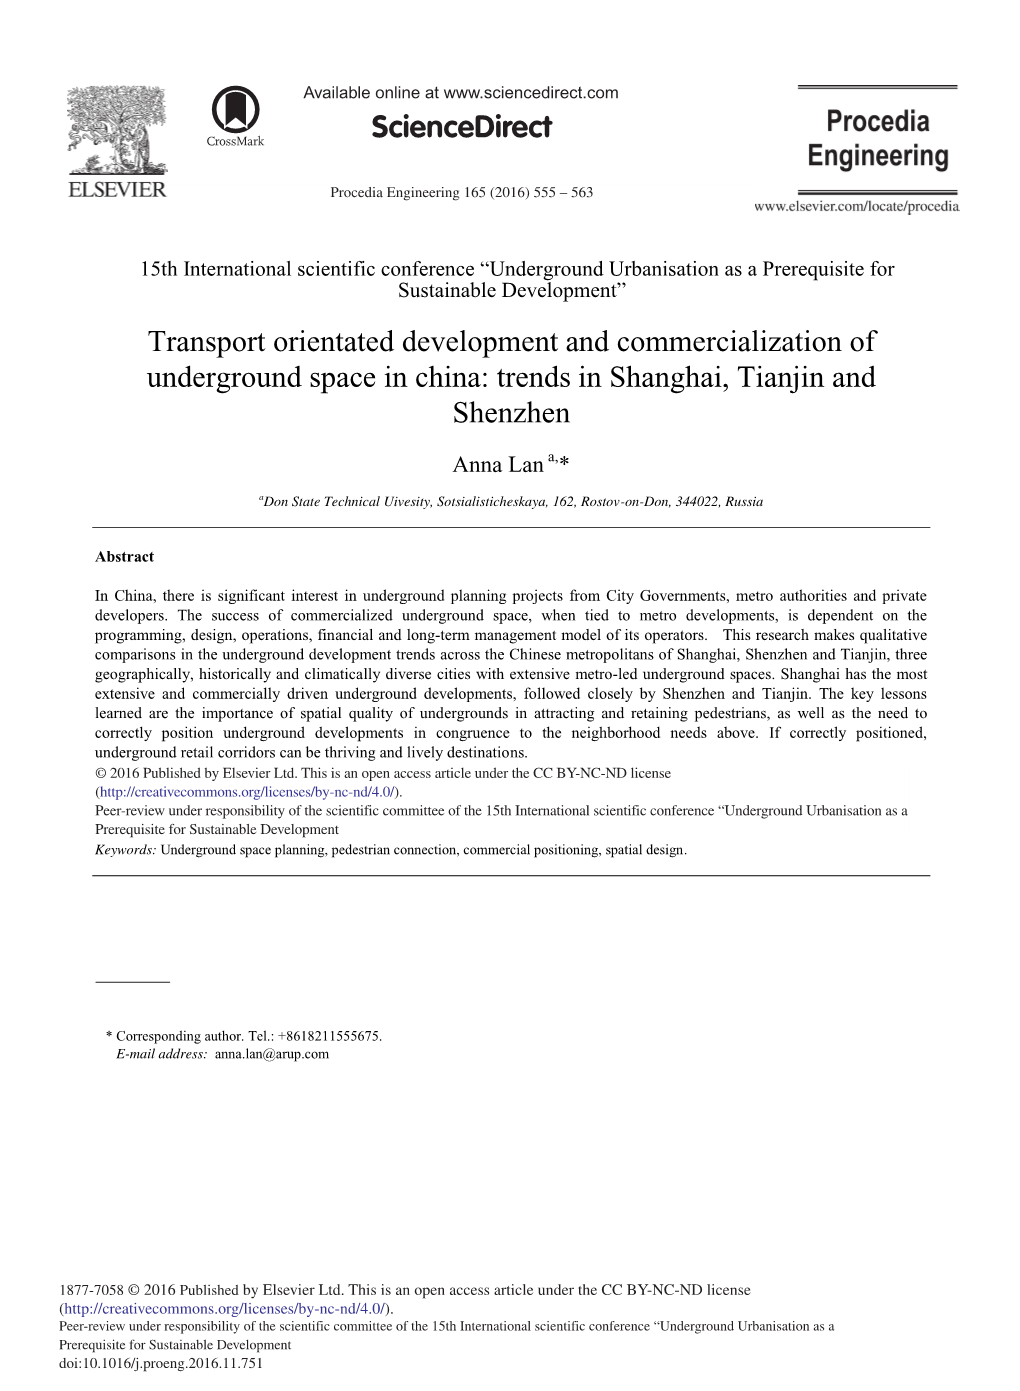 Transport Orientated Development and Commercialization of Underground Space in China: Trends in Shanghai, Tianjin and Shenzhen